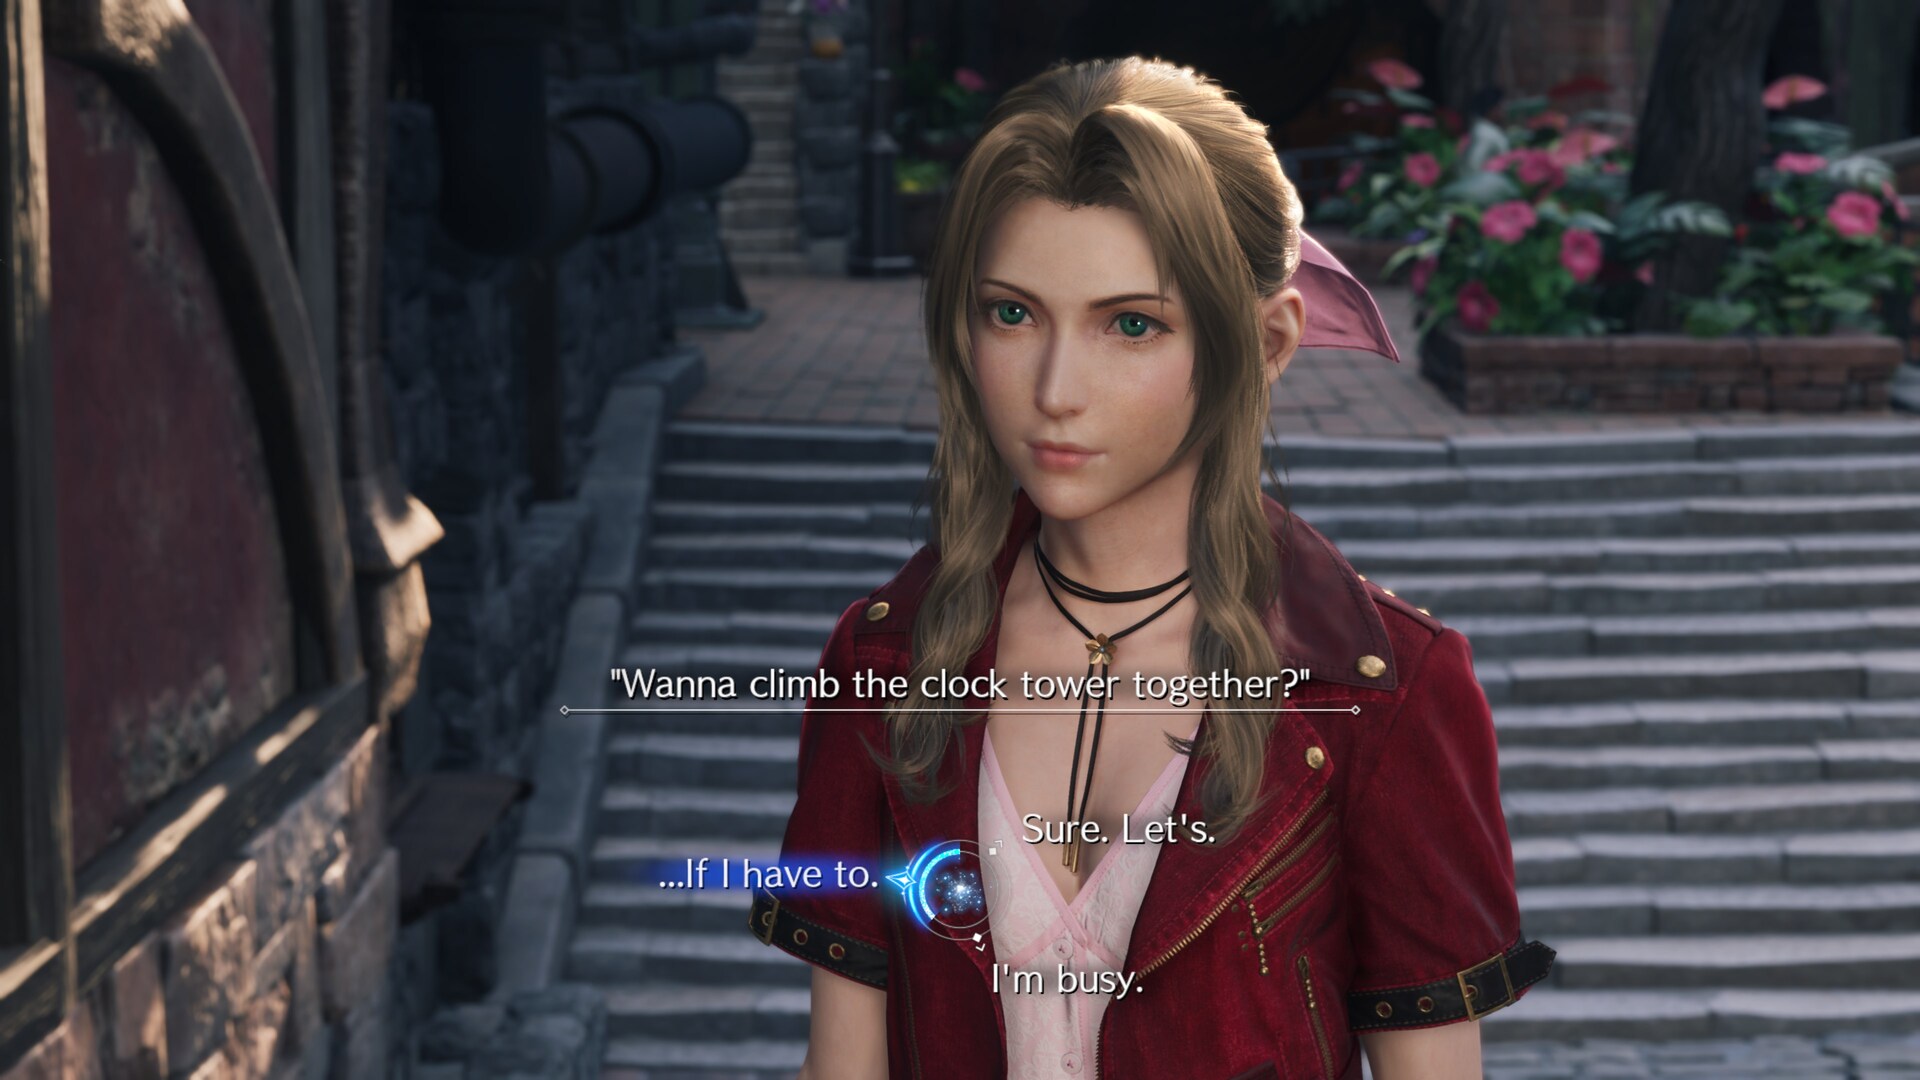 Dialogue wheel will appear during conversation with Aerith